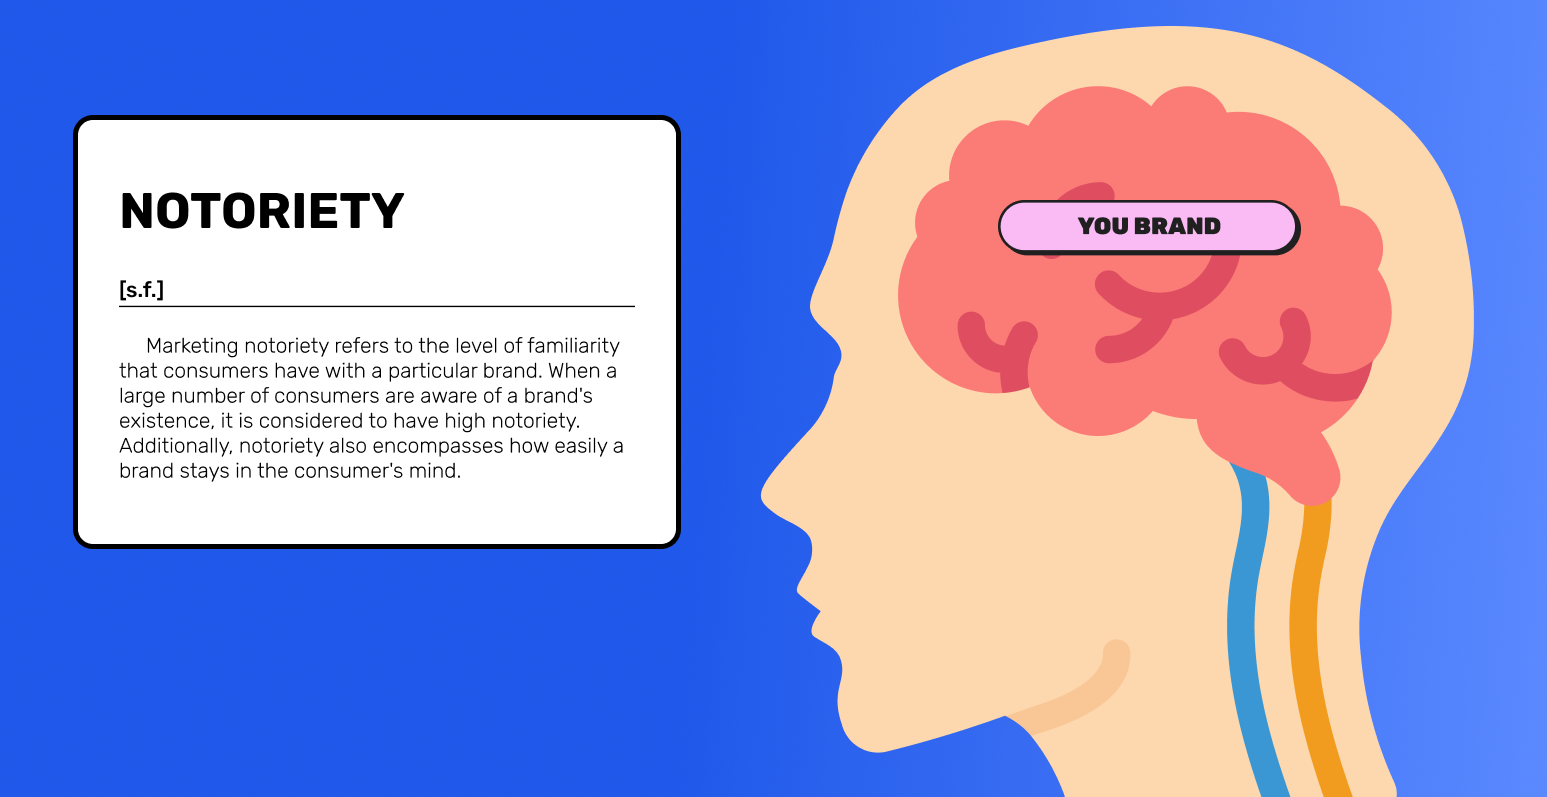 The image features a title box with the word "Notoriety" and a small font size definition below it. On the right, there is a head with an X-ray view of the brain, and inside the brain, there is a box with the text "Your Brand." The image represents how turning your Shopify store into a mobile app can help you gain notoriety and recognition